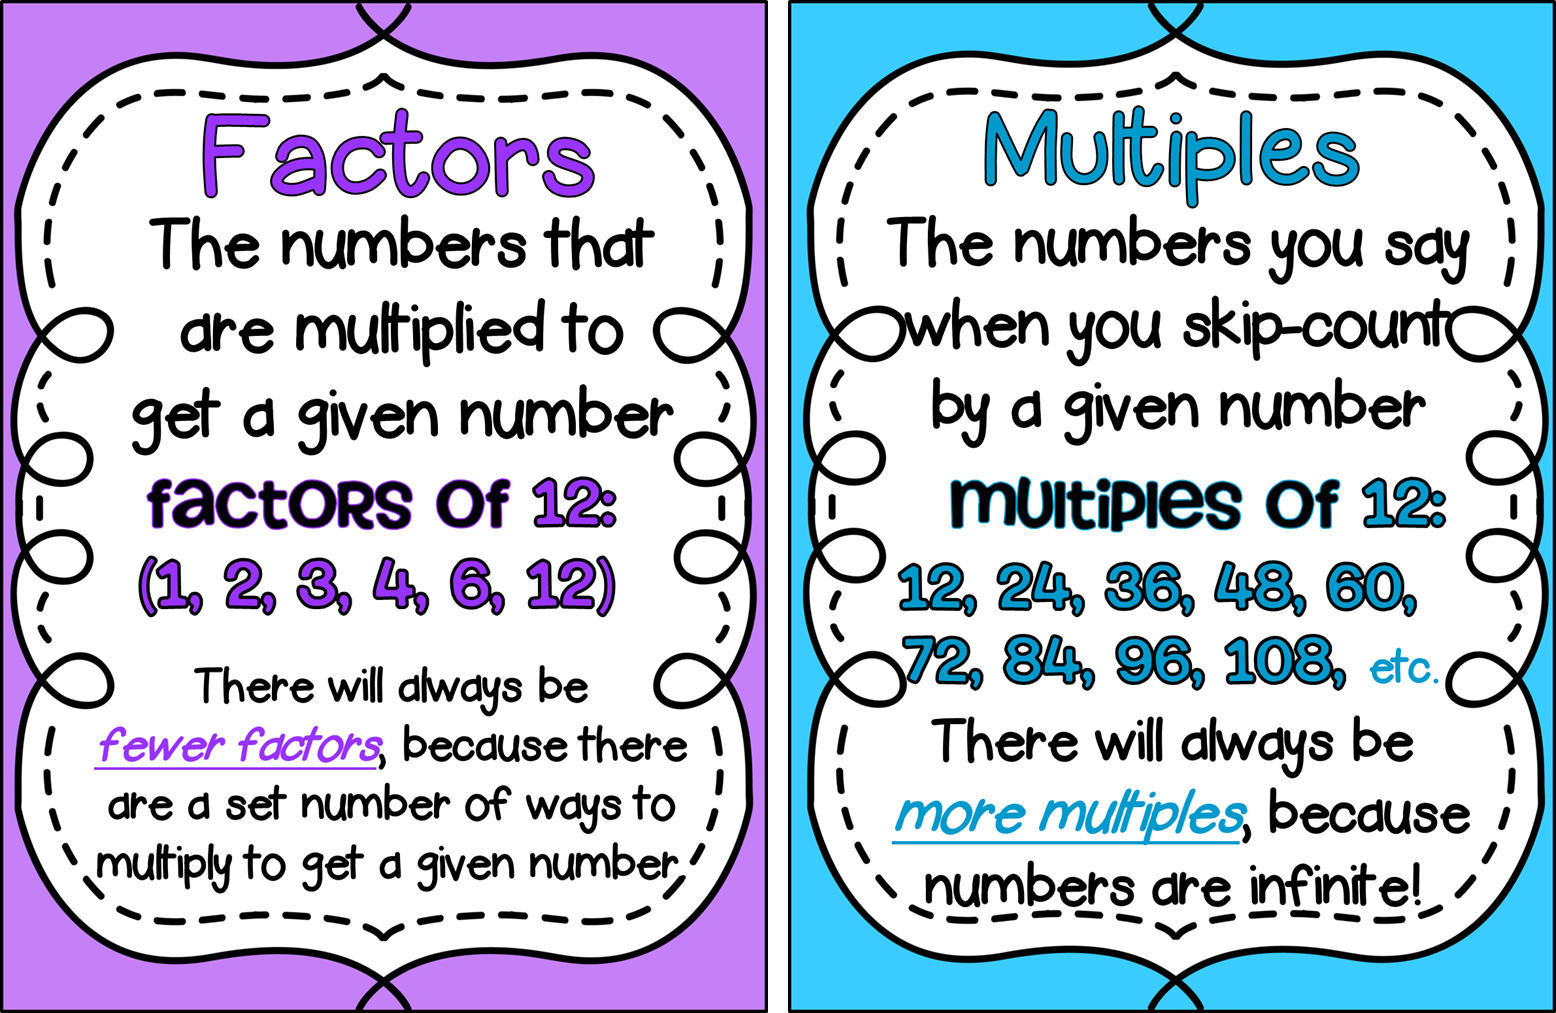 mrs-mcgaffin-s-fabulous-4th-graders-factors-and-multiples-and-arrays-oh-my